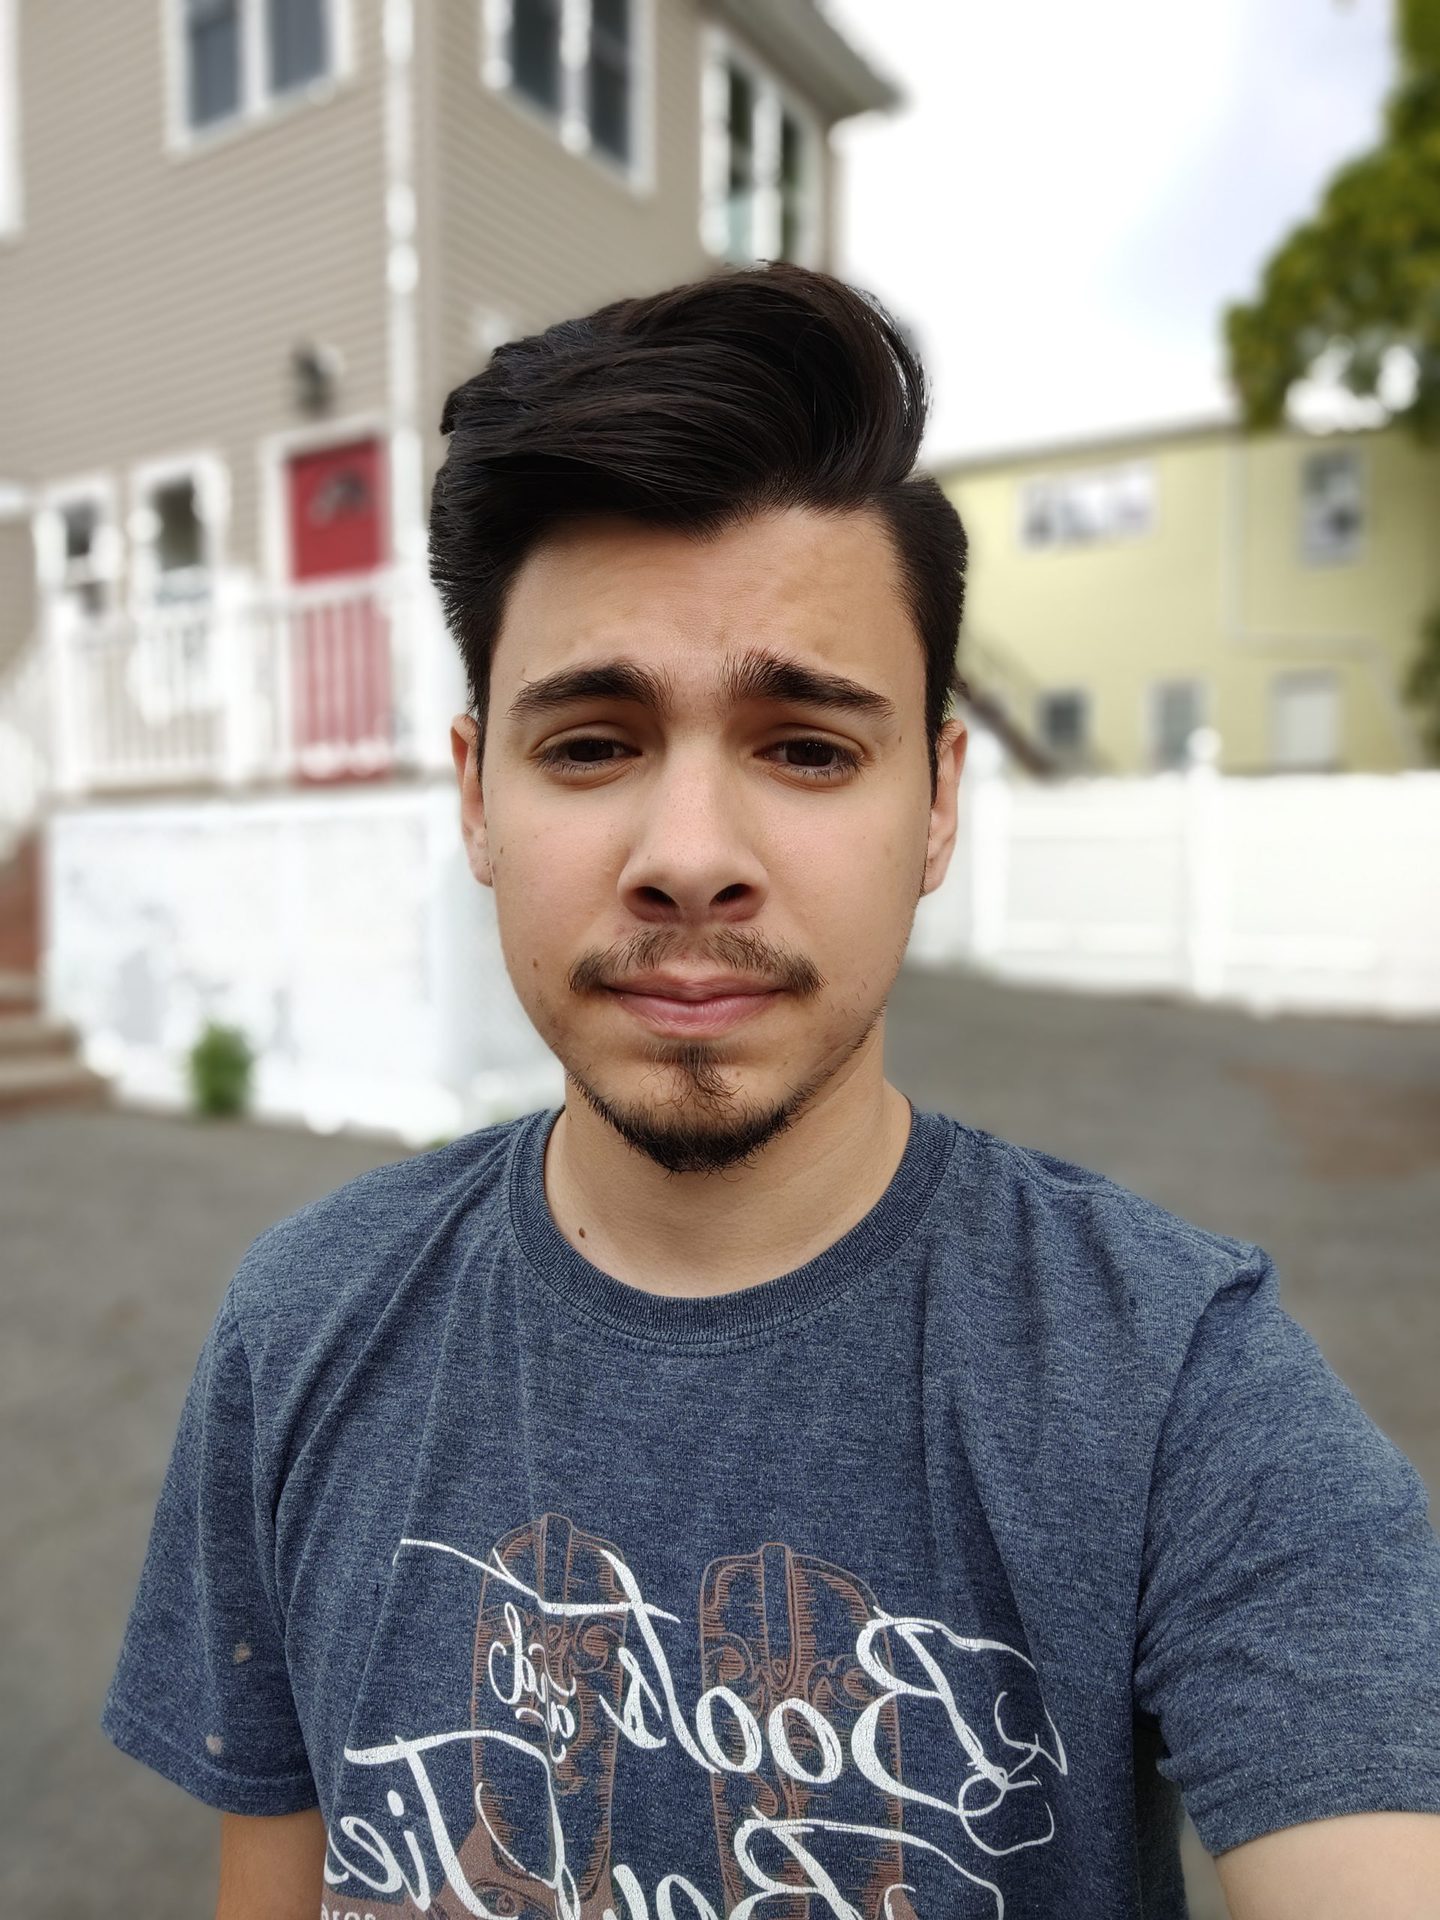 TCL 20 Pro 5G front-facing camera selfie shot of a dark-haired man in a gray t-shirt outdoors.